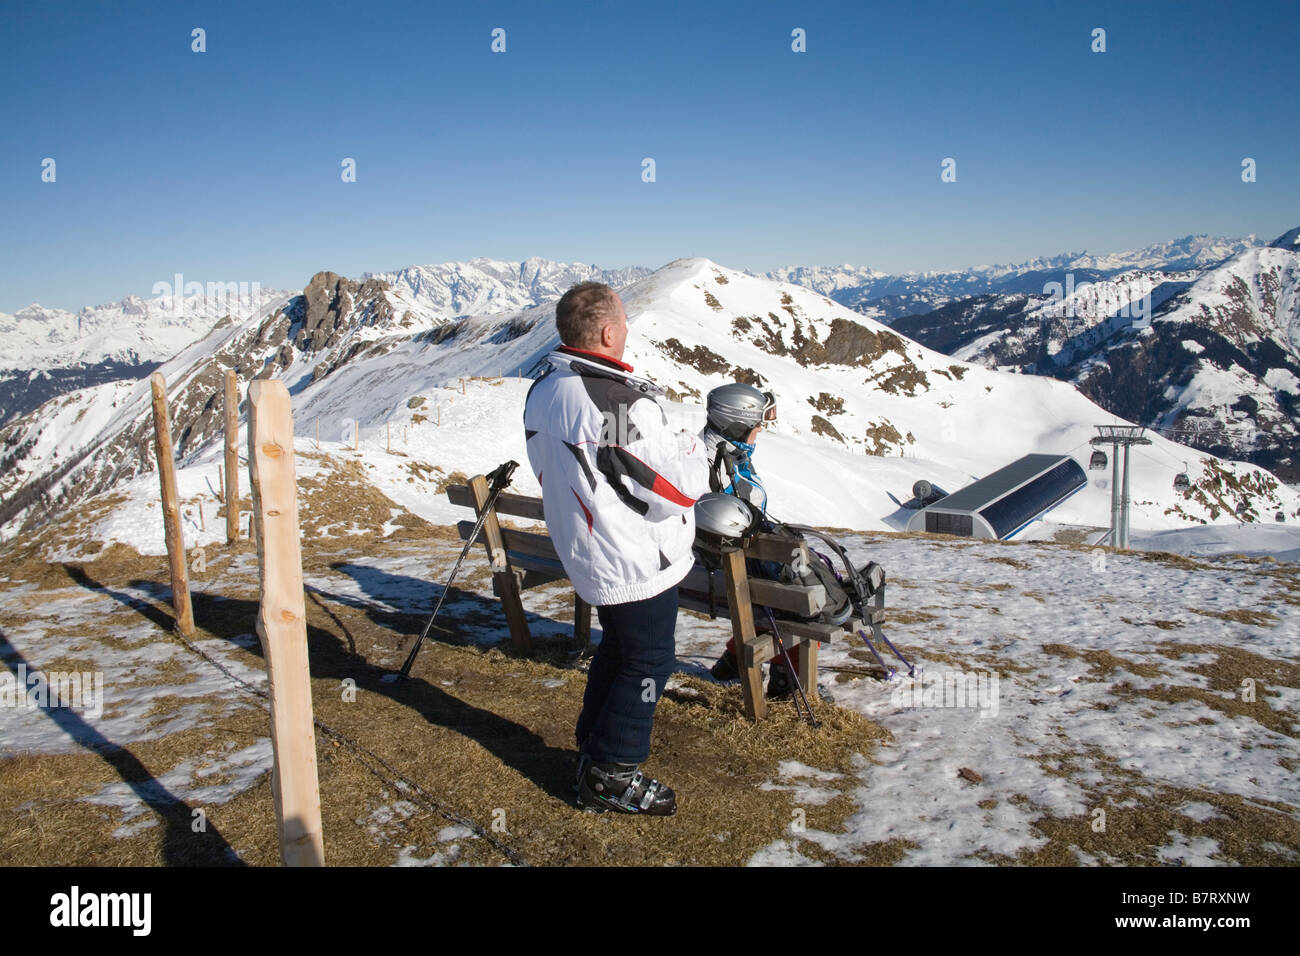 Pinzgau Region Austria EU January Male and female skiers at a viewpoint above Gipfelbahn gondola station taking in view to Alps Stock Photo